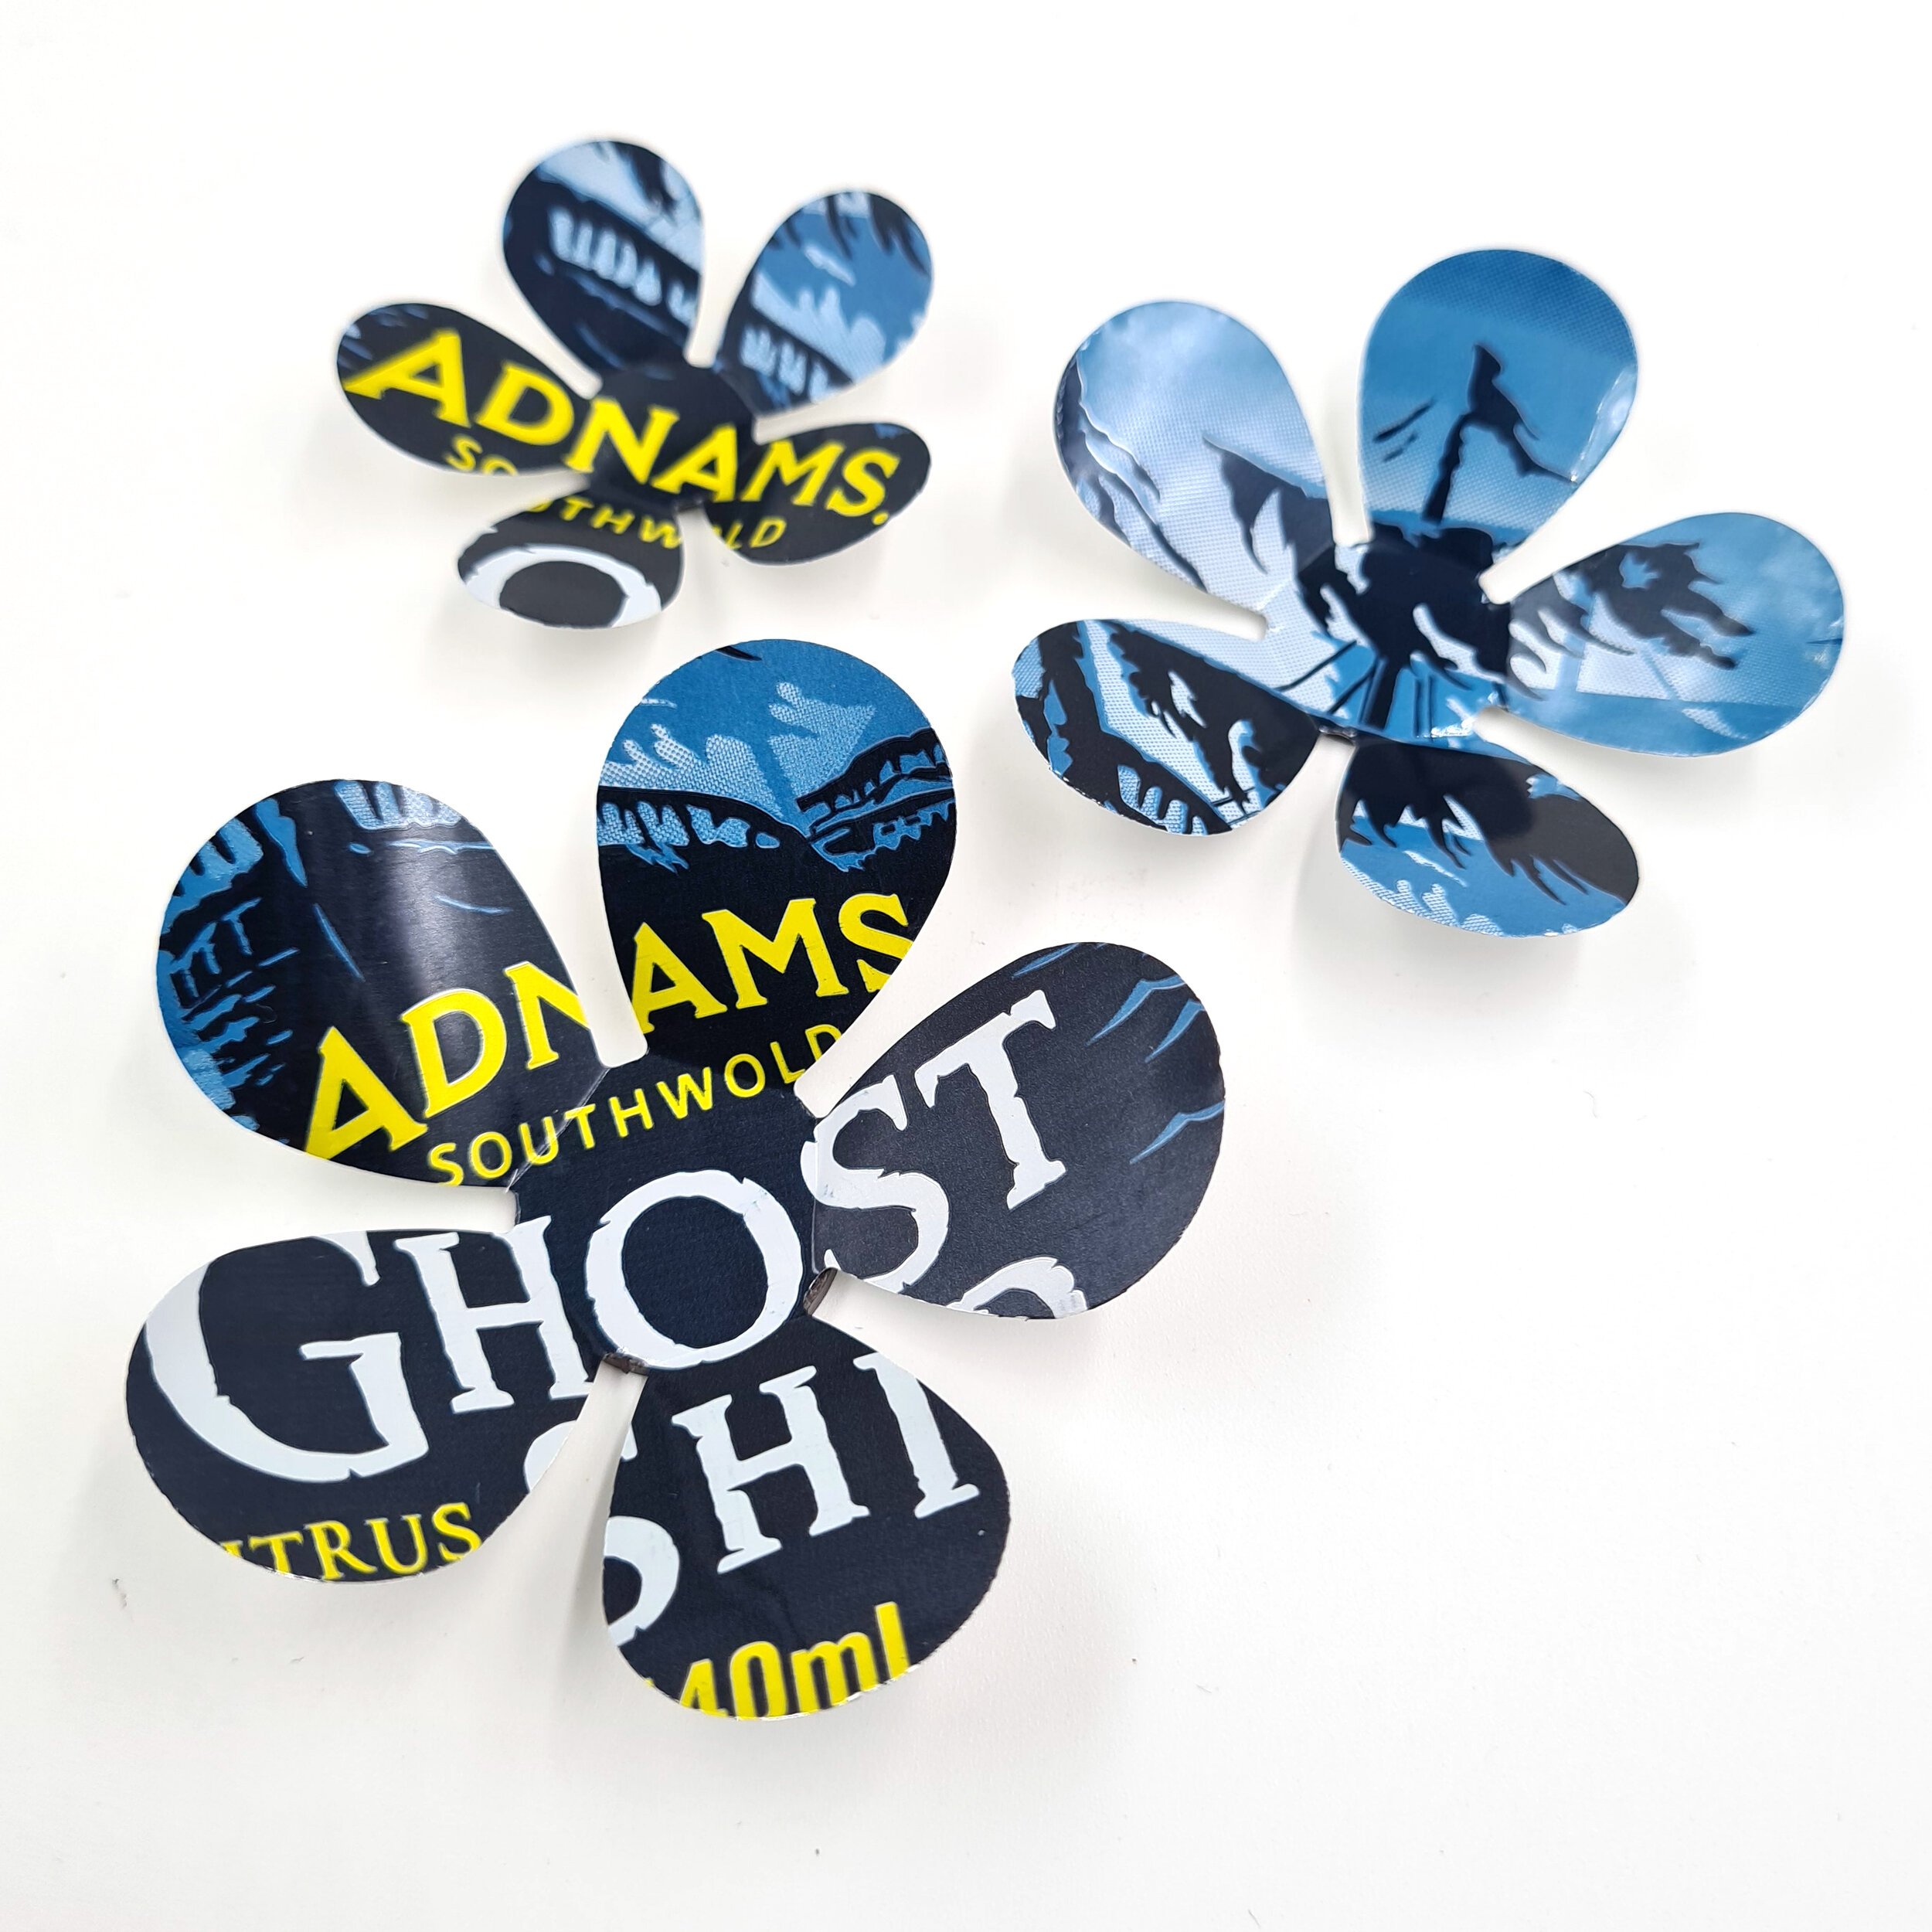 Three Adnams eco Can Flower Magnets